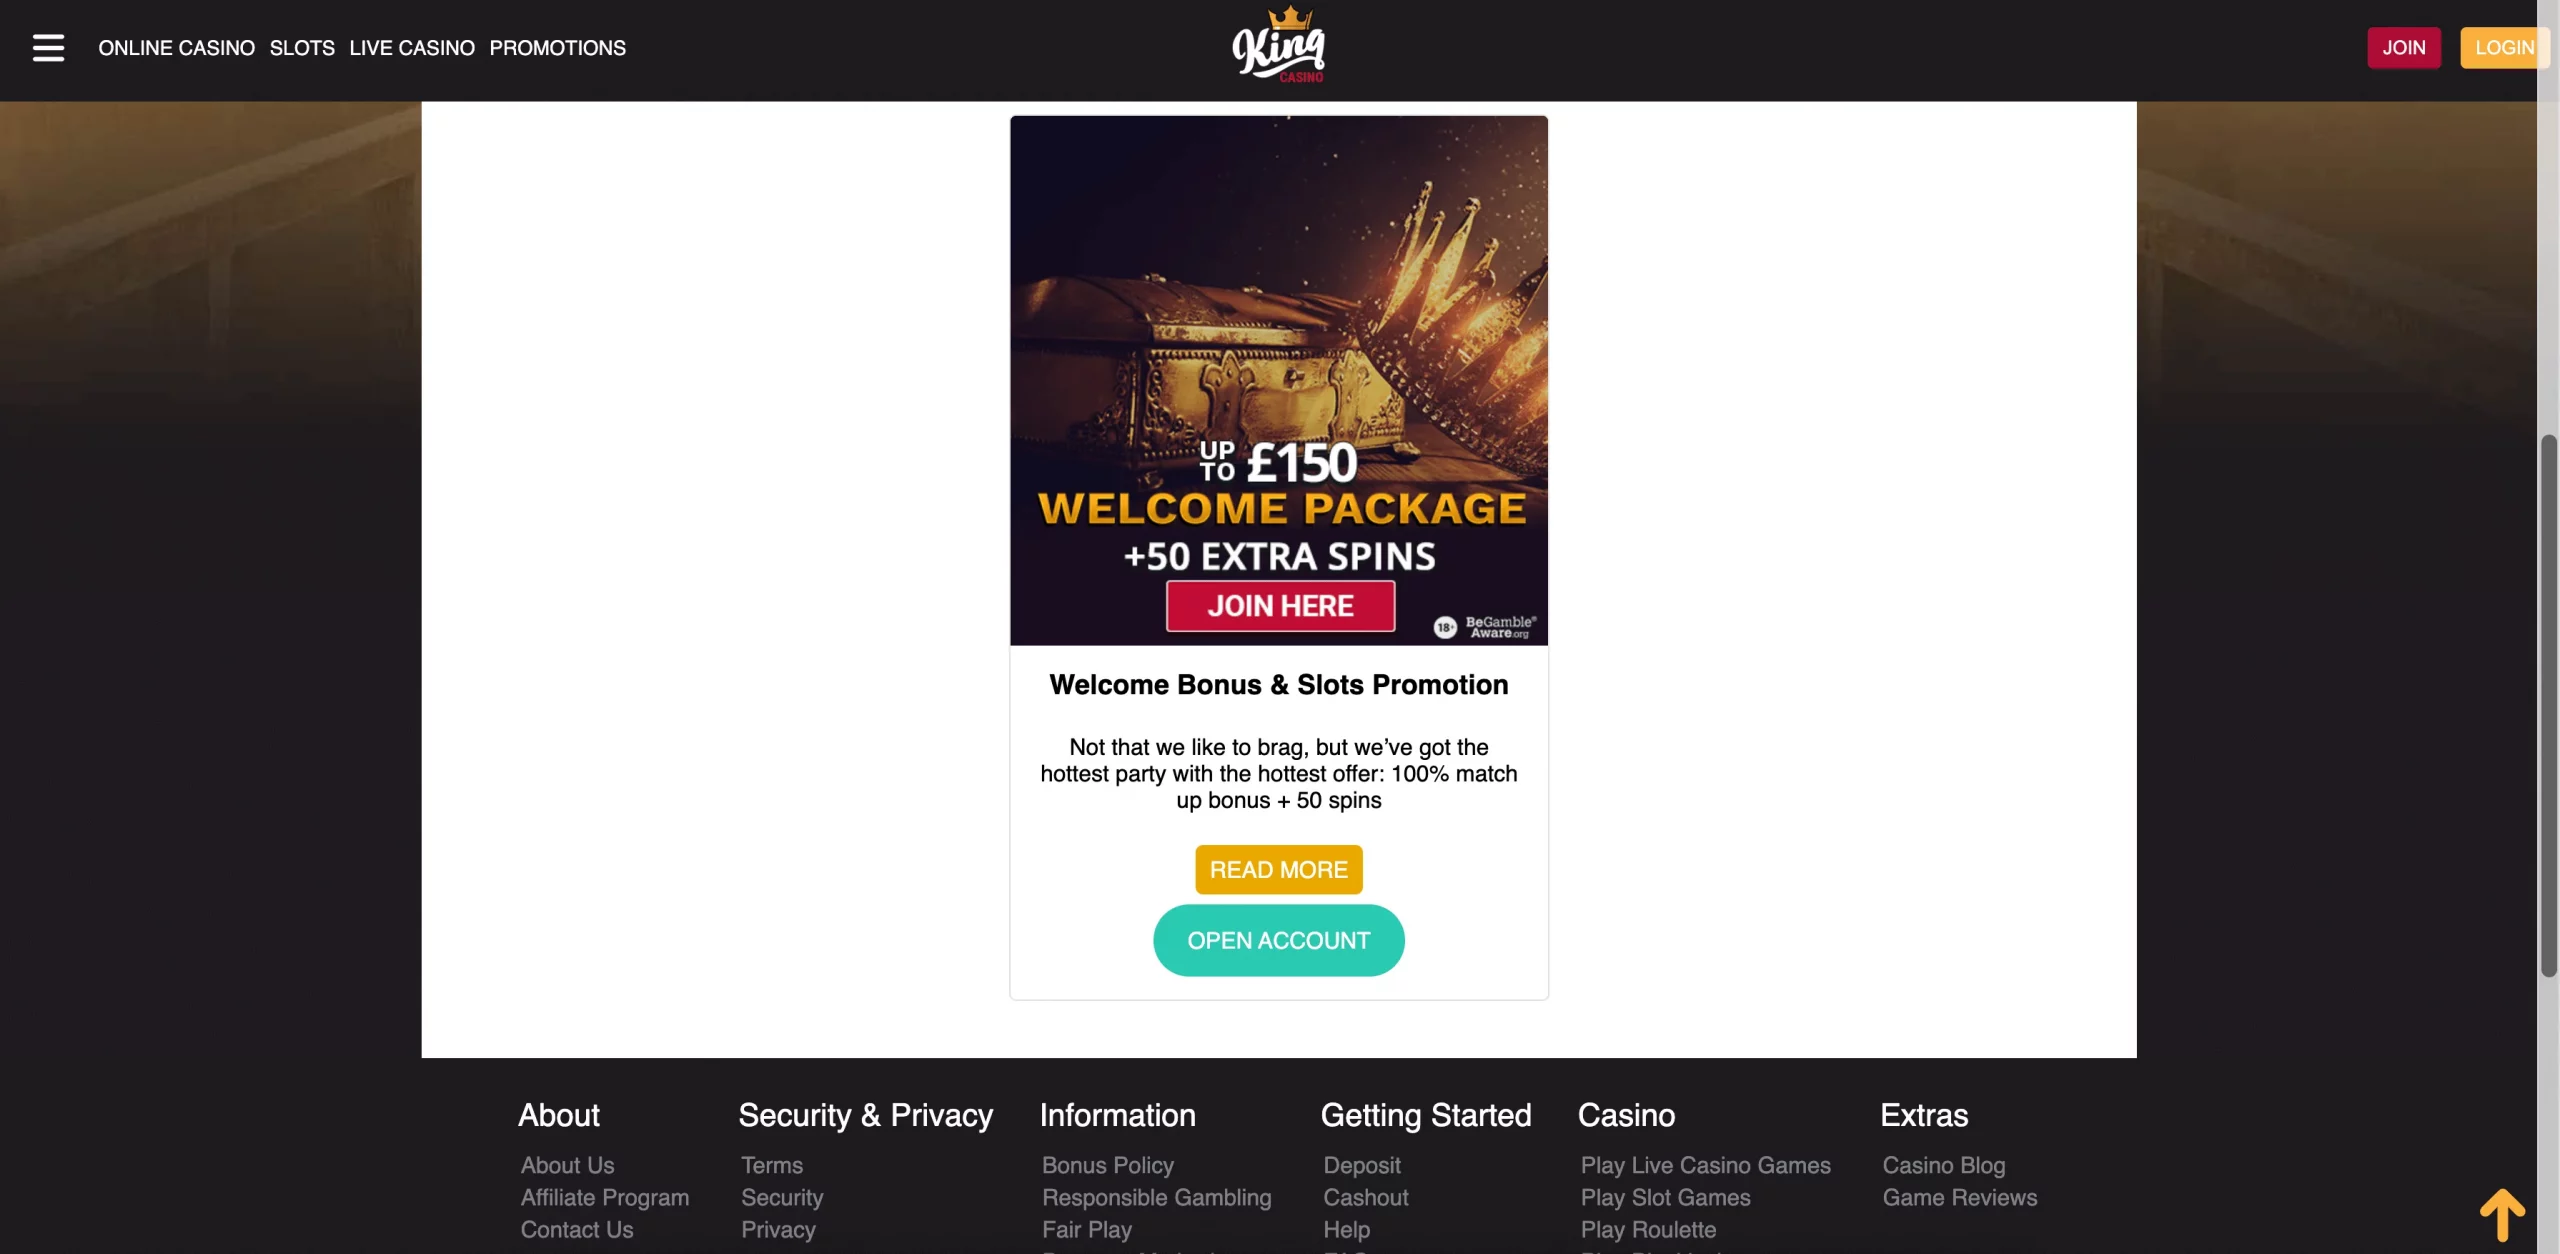 Bonuses and promotions offered by King Casino UK